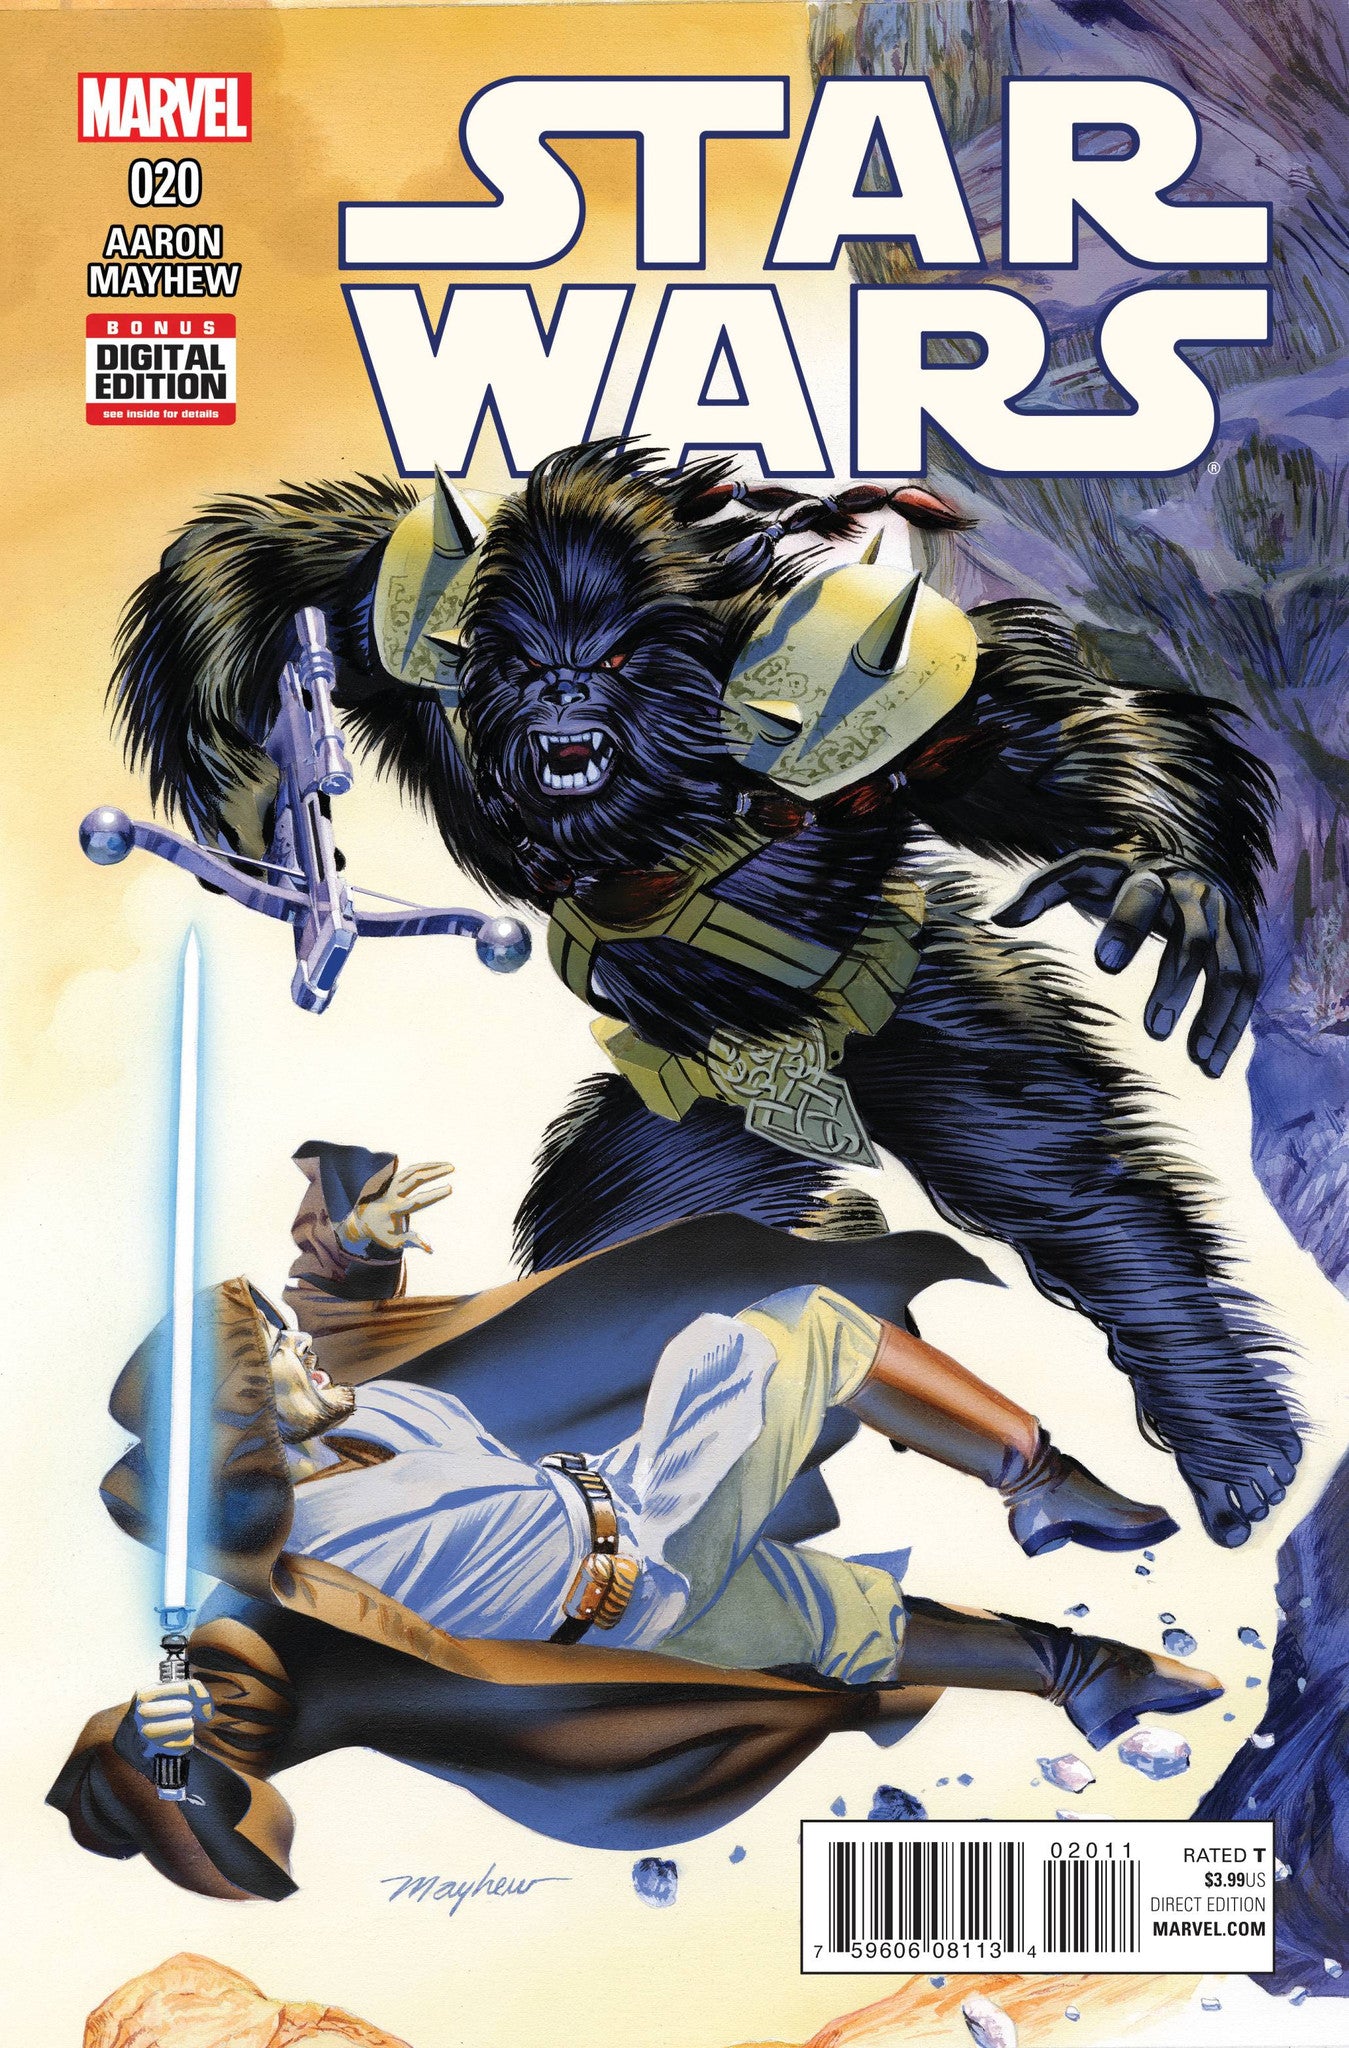 STAR WARS #20 COVER